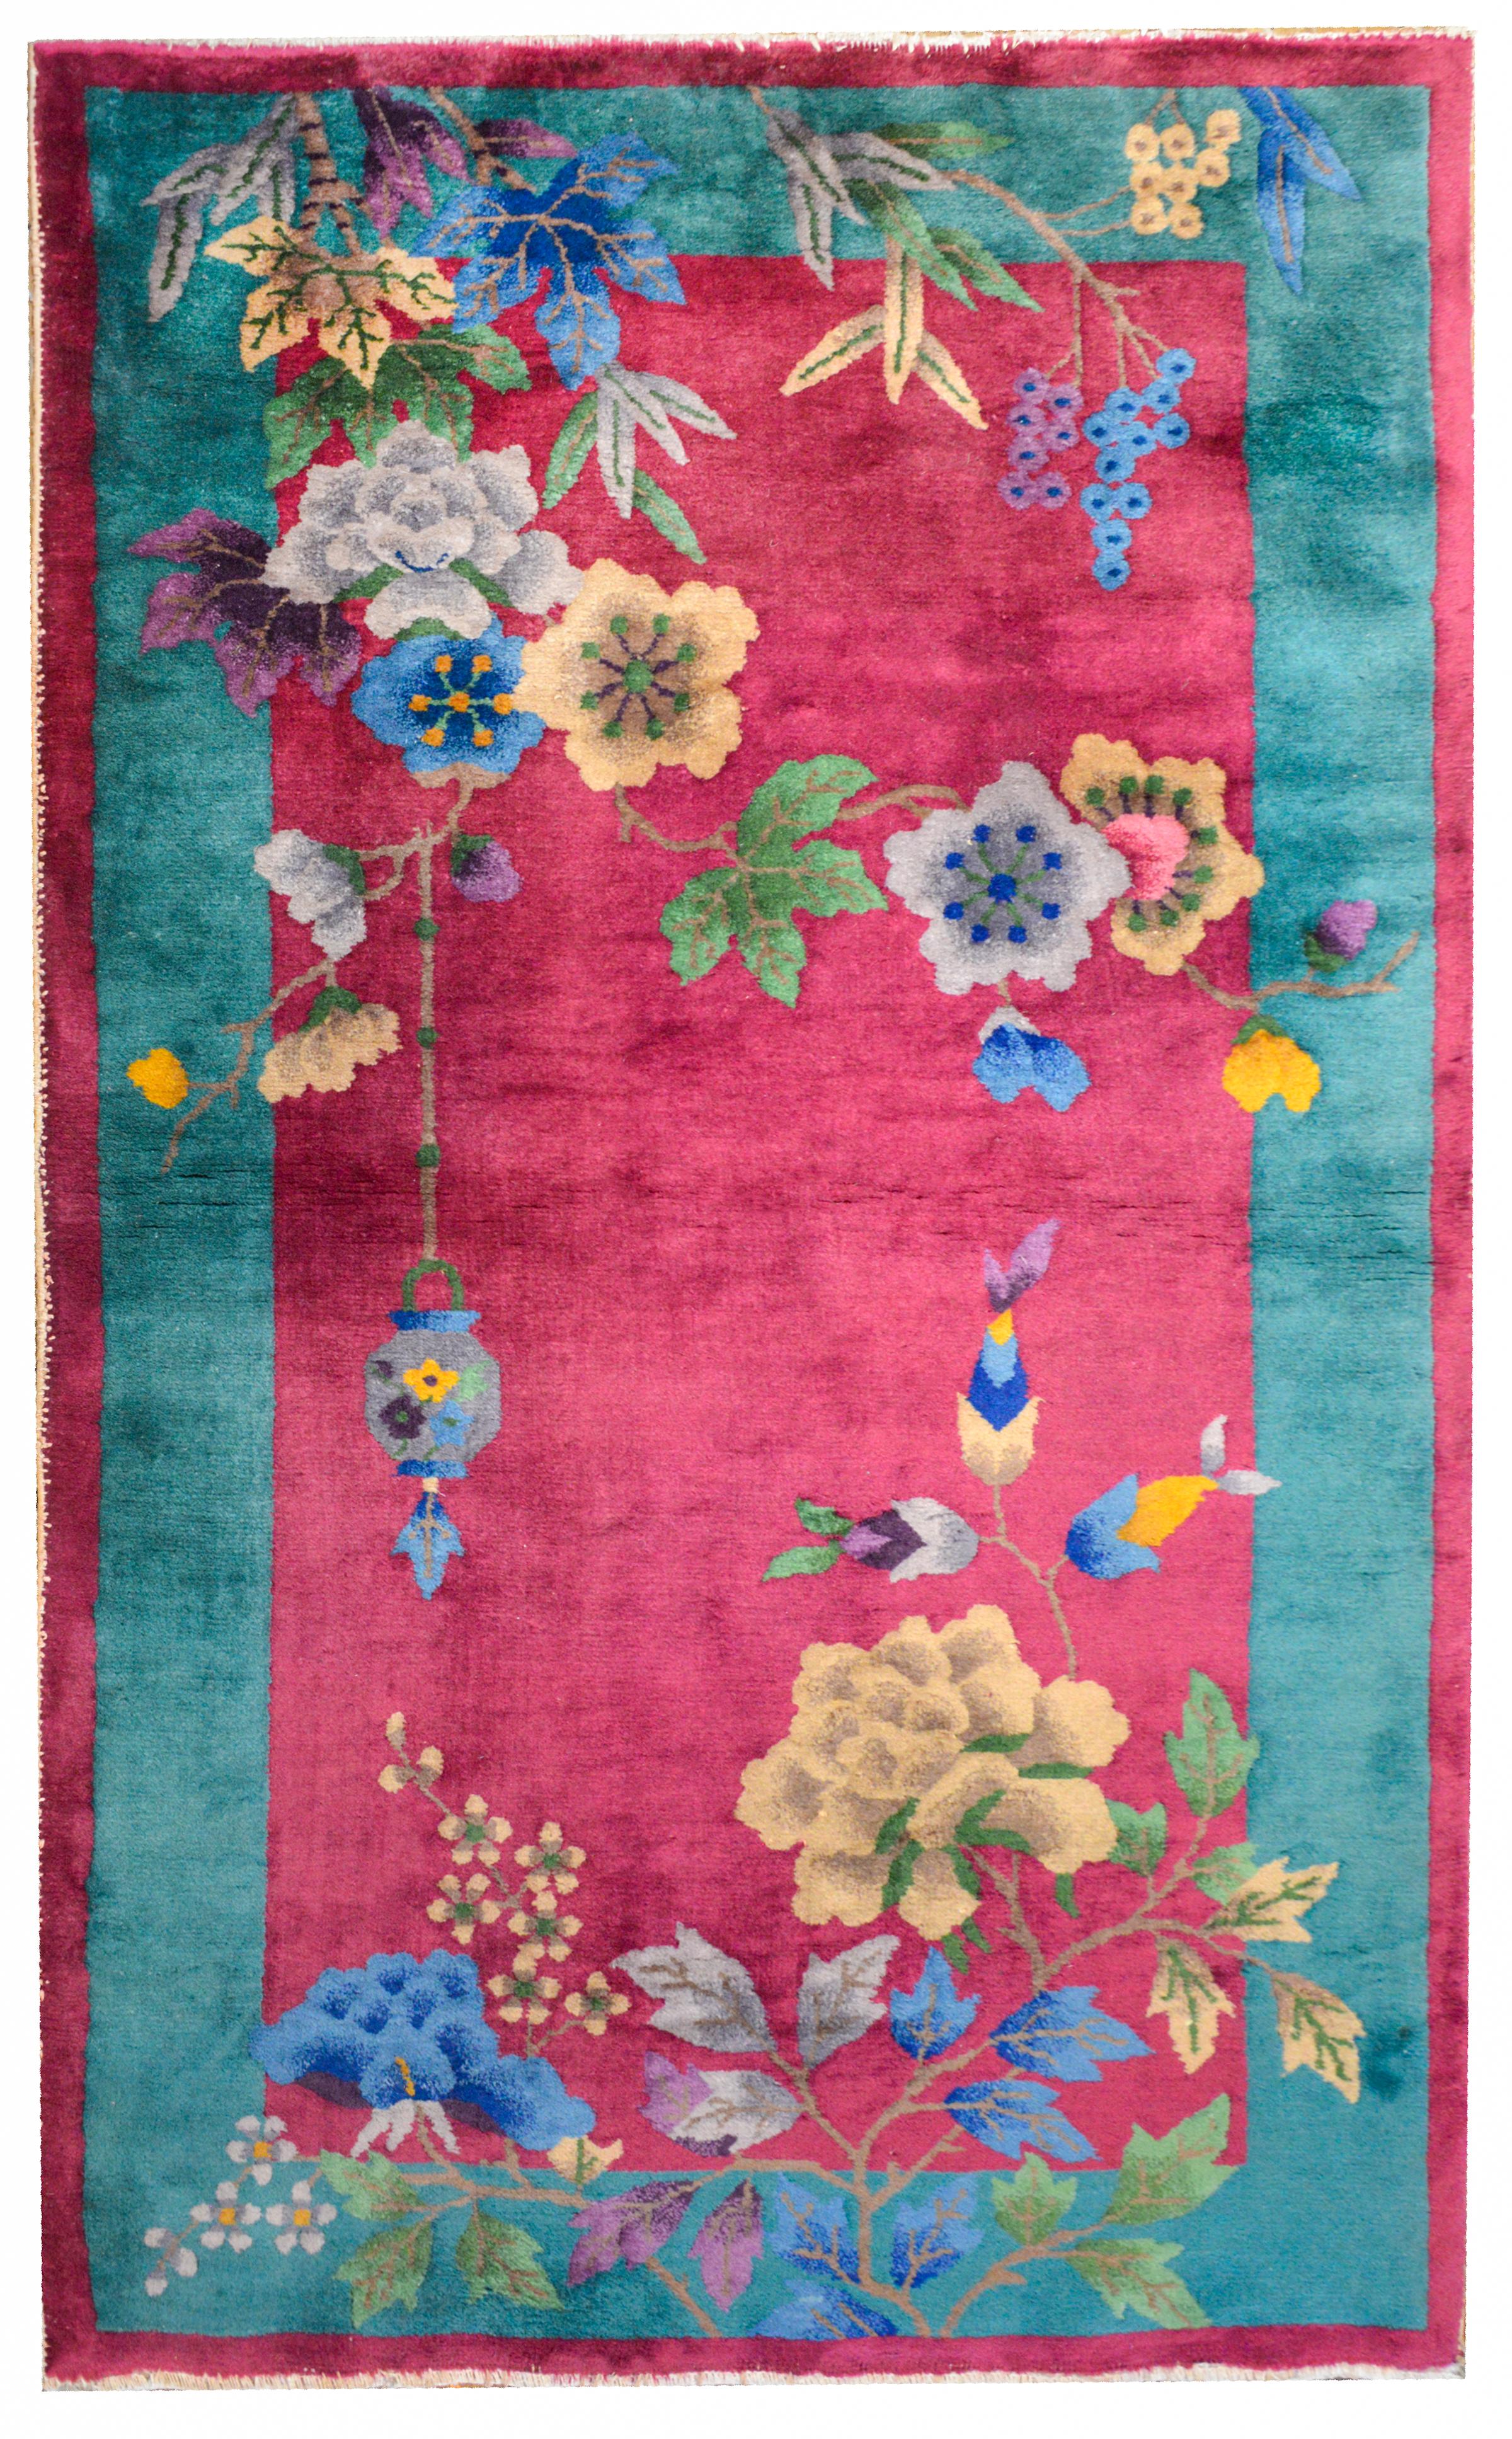 A bold and beautiful early 20th century Chinese Art Deco rug with a cranberry colored field surrounded by a wide turquoise stripe border. Several multi-colored peonies are overlaid in an asymmetrical composition.